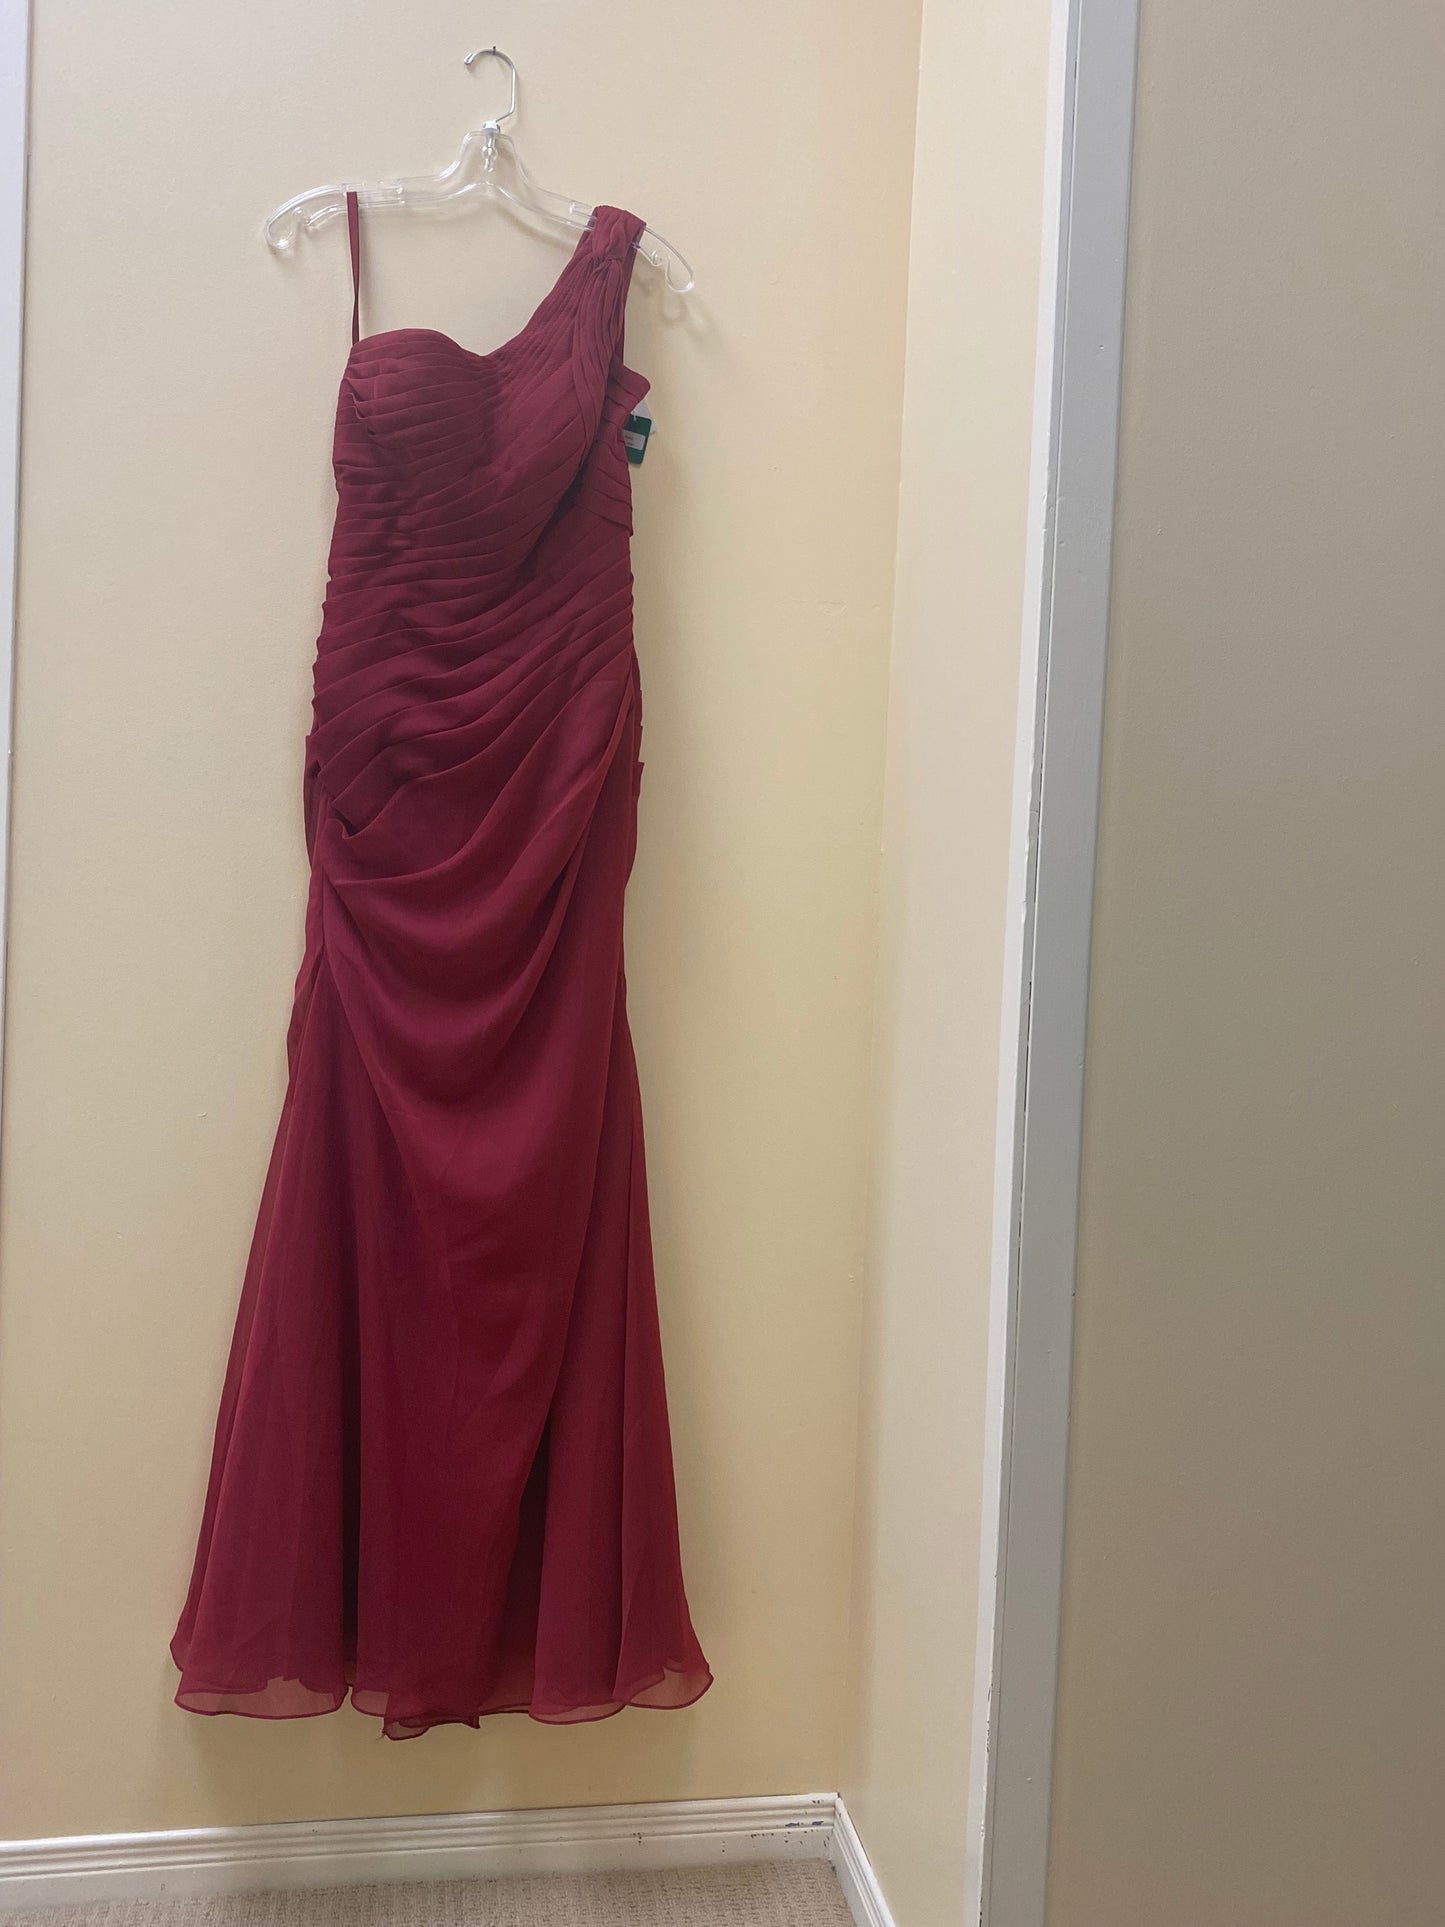 ANGELINA FACCENDA - 20452 - Claret Size 10 or Peacock Size 14 Long A Line Prom / Mother of the Bride / Bridesmaid Dress